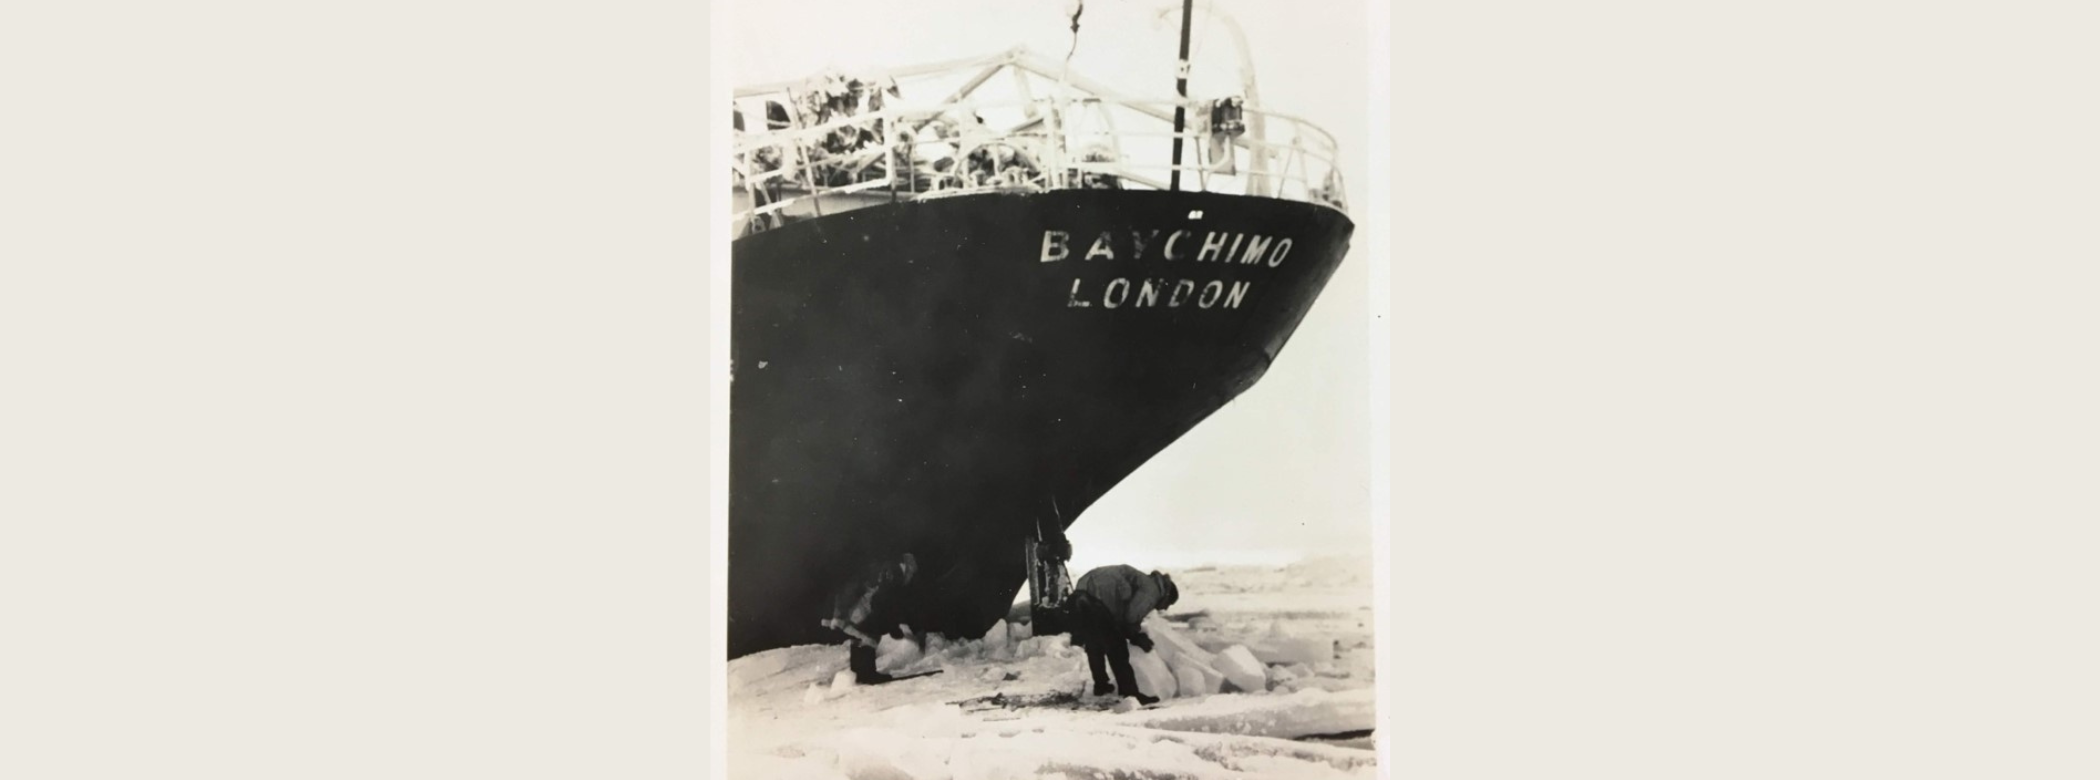 Black and white photograph of two individuals on thick ice below the stern of the ship “BAYCHIMO”.